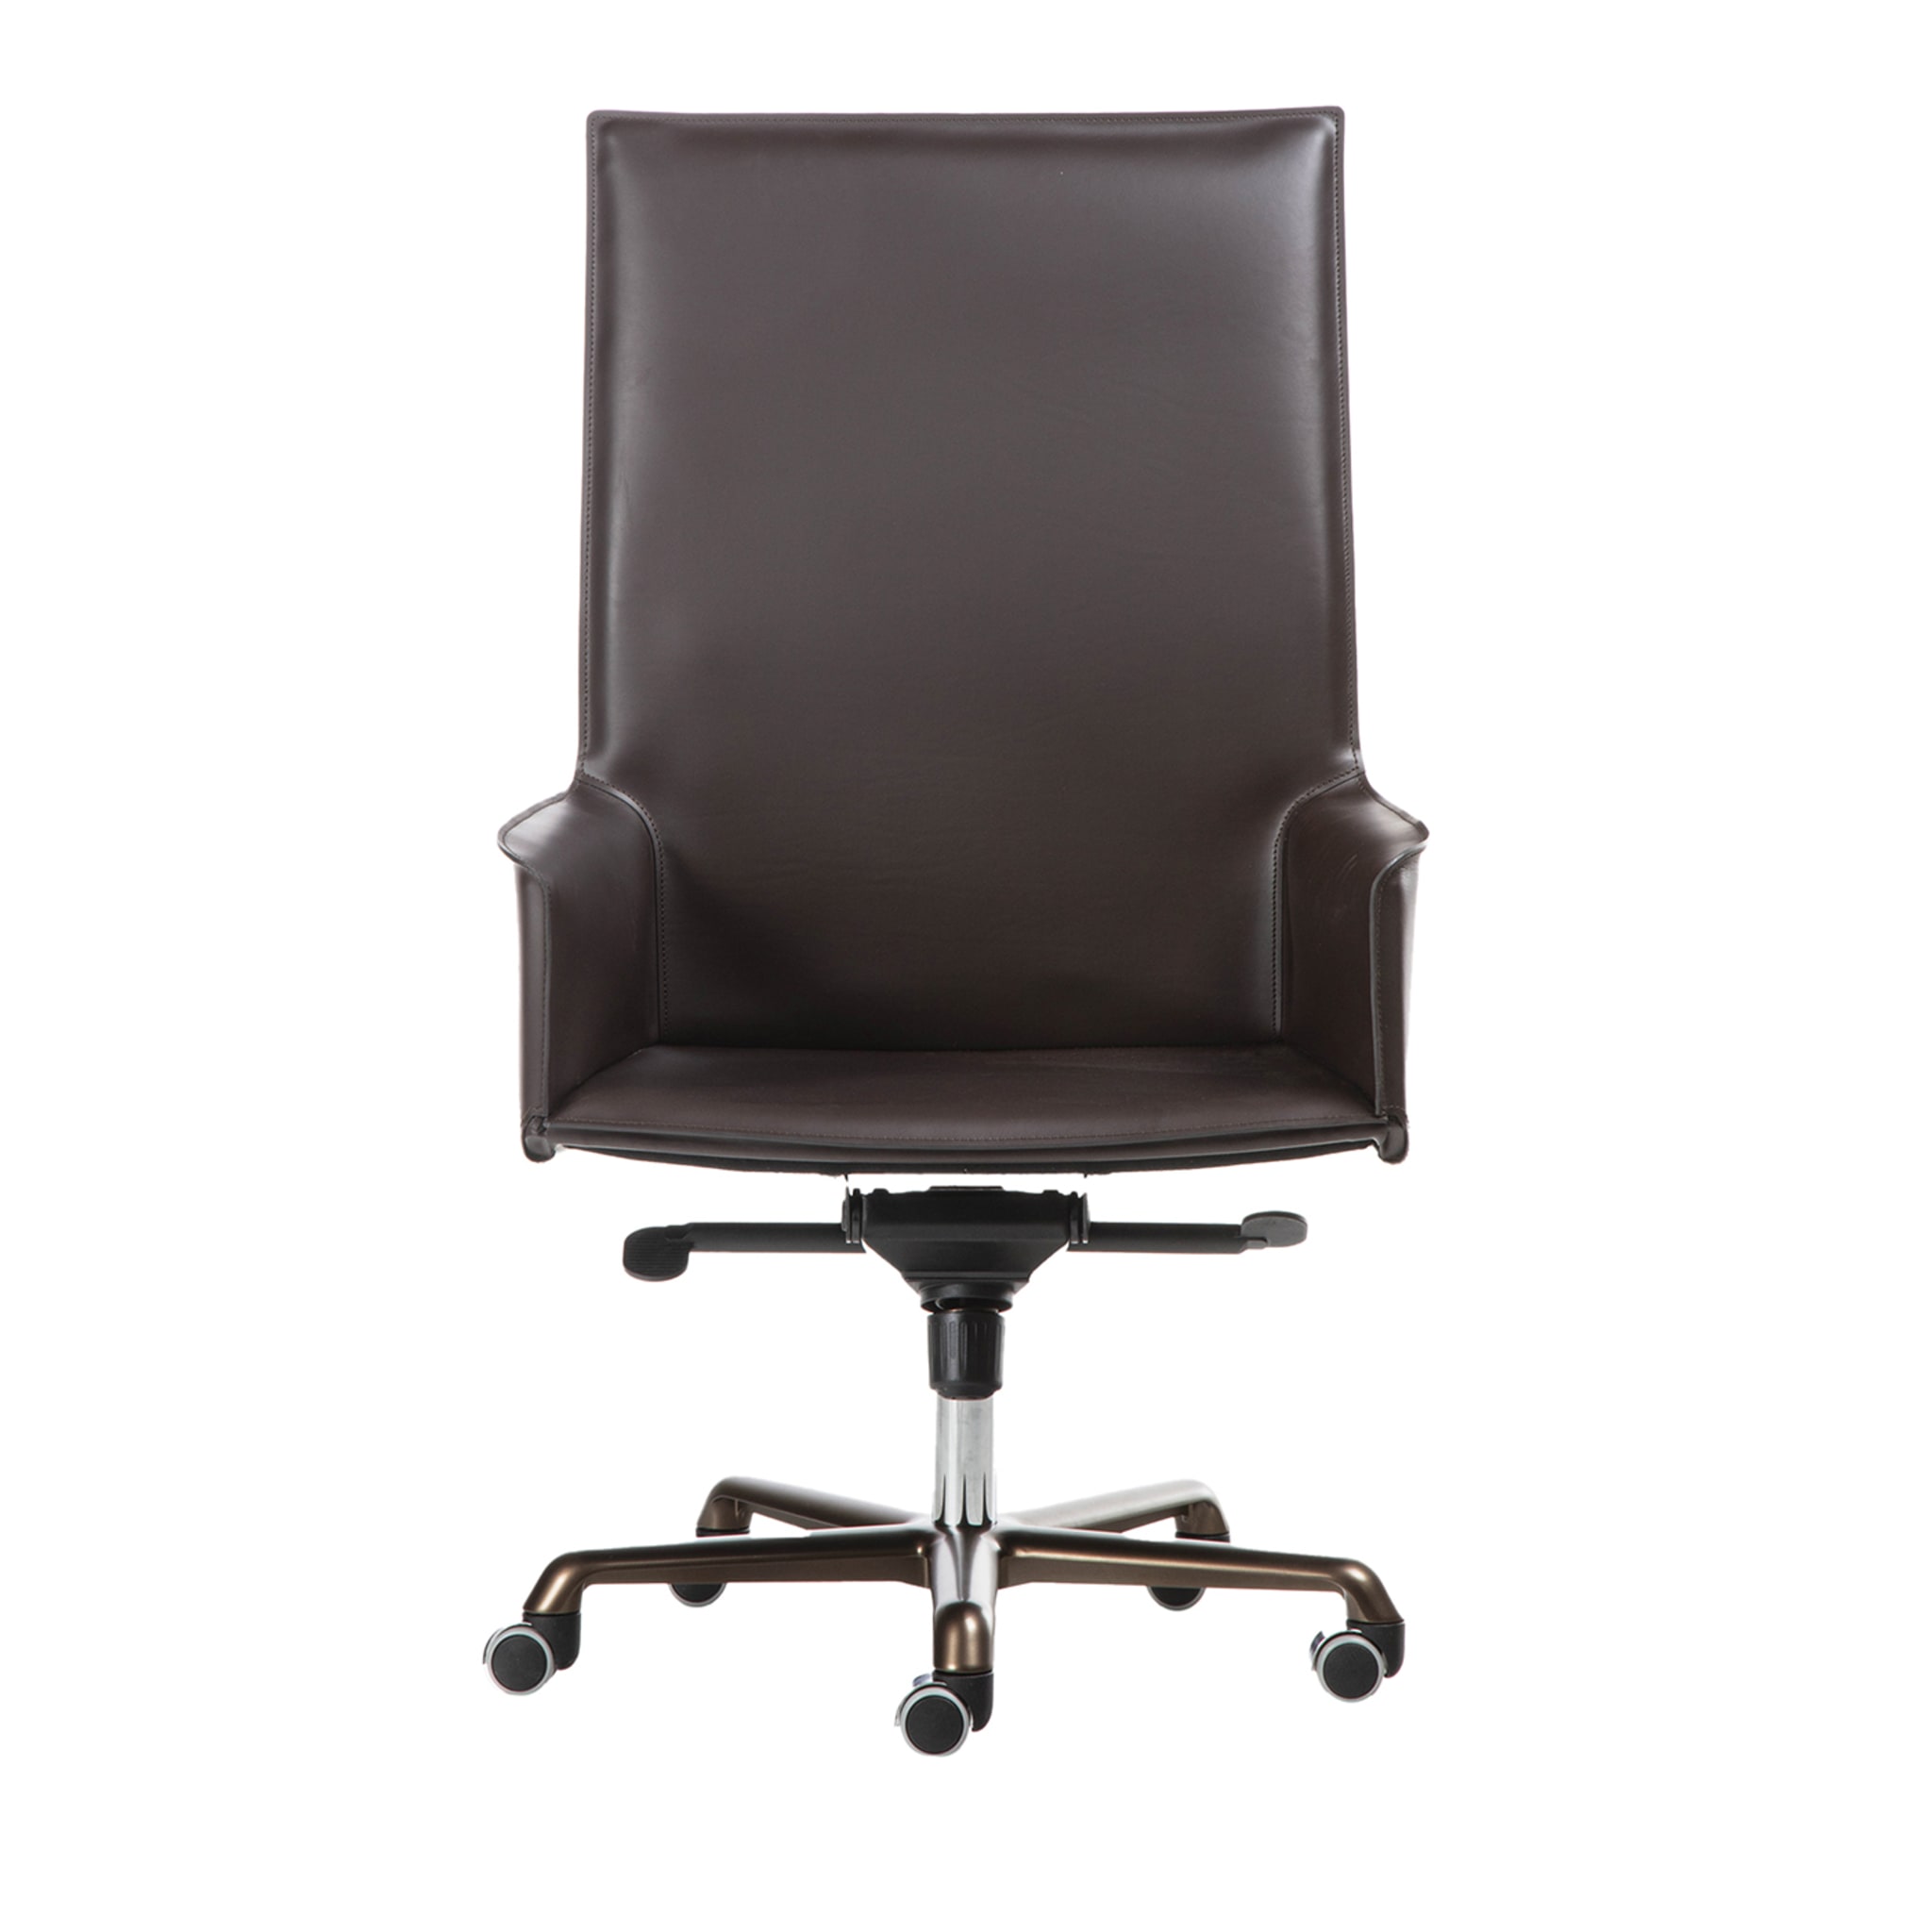 Pasqualina Swivel President Chair by Grassi&Bianchi and RedCreative - Main view